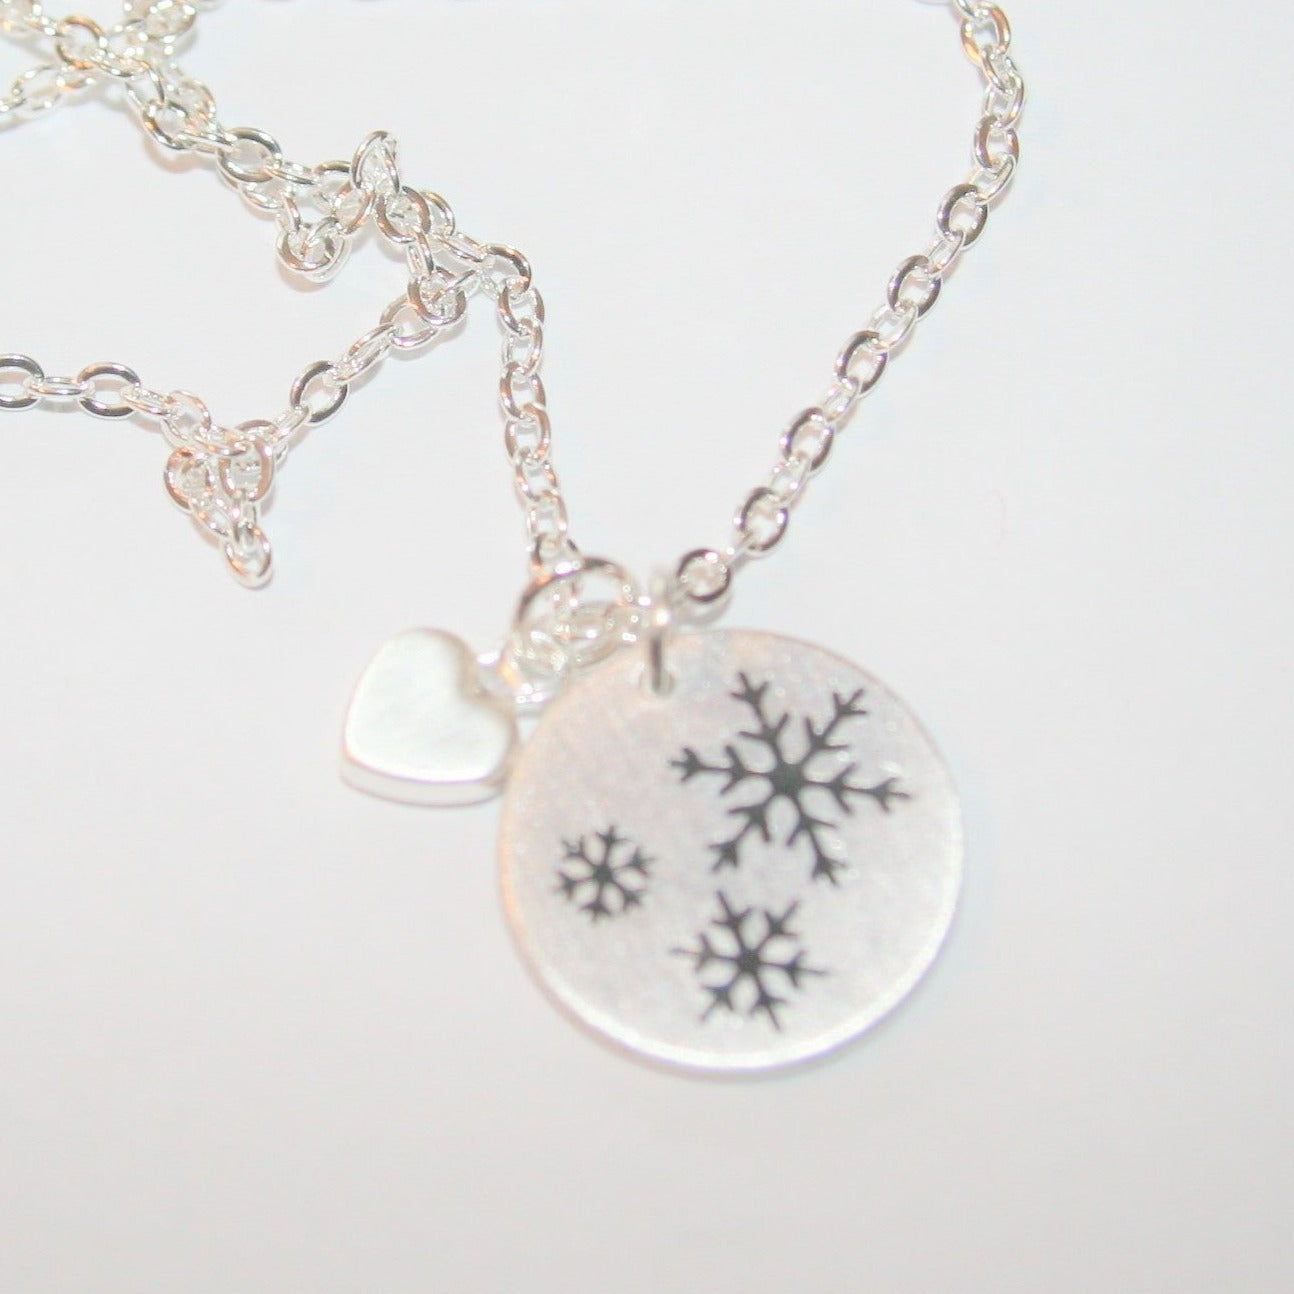 Etched Snowflake Pendant - SNL416 - pack of 5